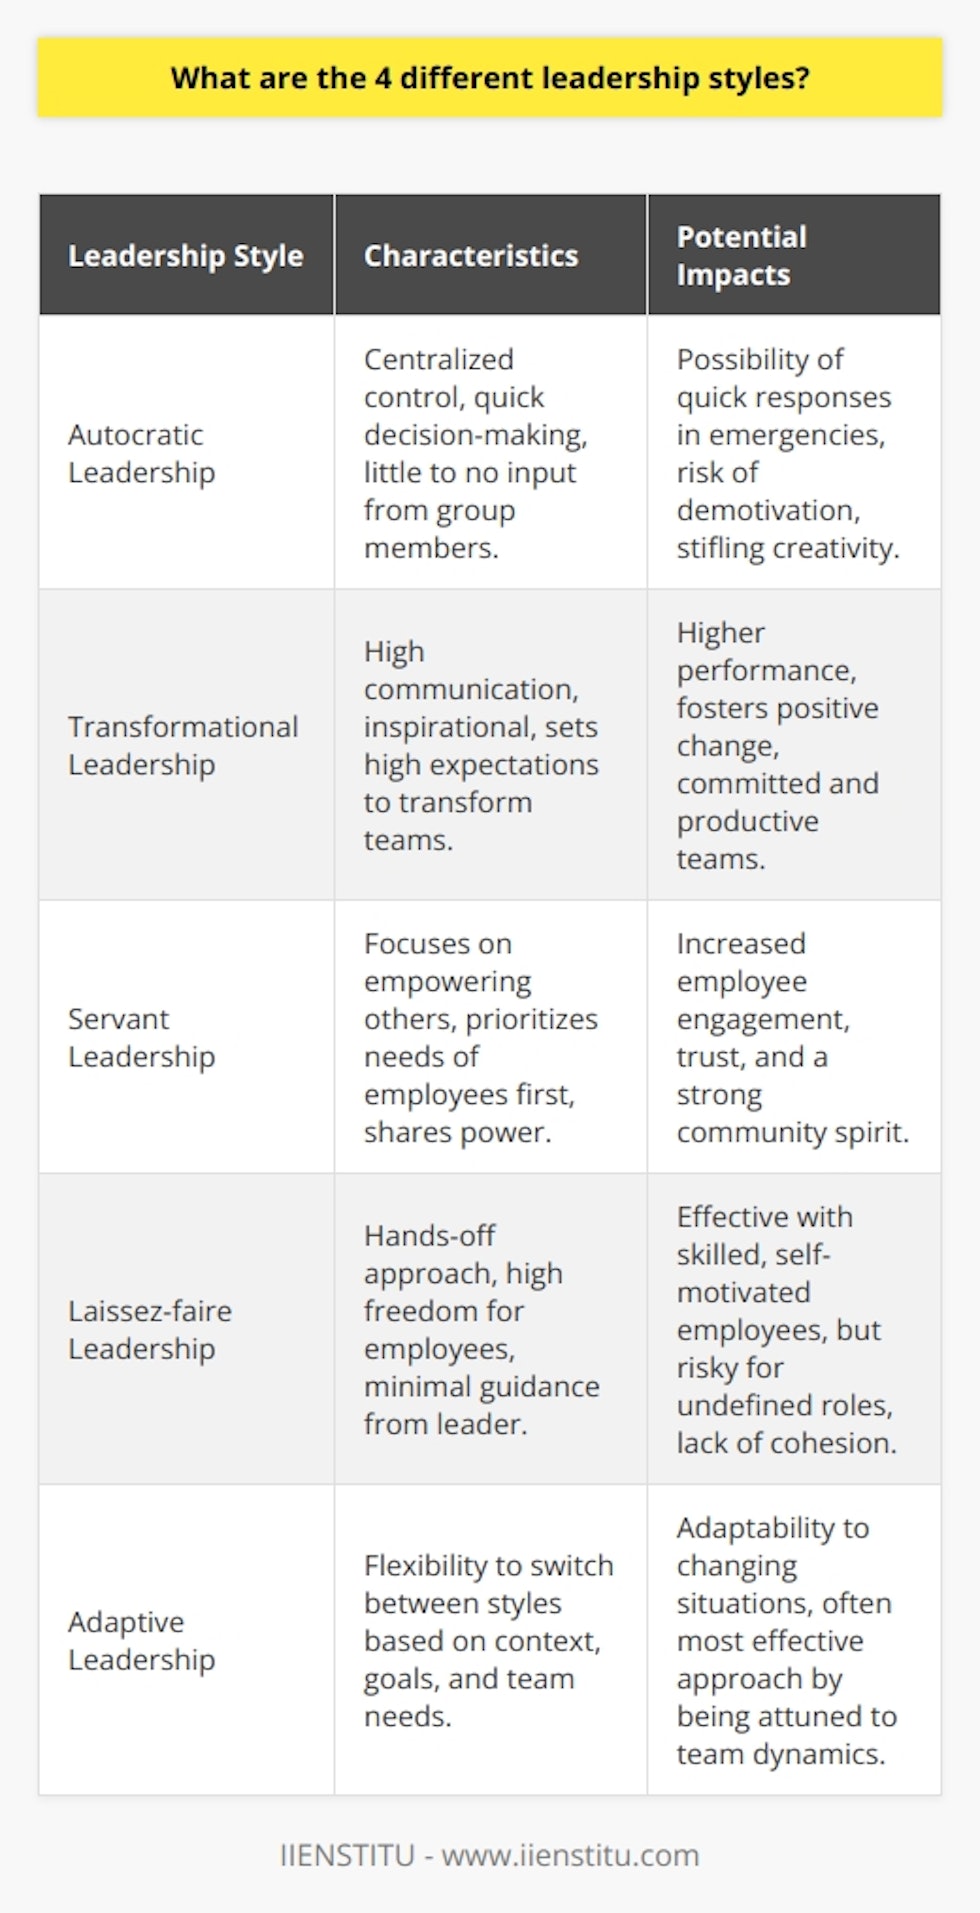 Leadership is the art of motivating and guiding individuals or groups towards achieving common goals. Various leadership styles can be employed depending on the context and the individuals involved. Here, we explore four distinct leadership styles: Autocratic Leadership, Transformational Leadership, Servant Leadership, and Laissez-faire Leadership.### Autocratic LeadershipAutocratic leadership is characterized by individual control over all decisions with little input from group members. Leaders in this style make choices based on their judgment and ideas and rarely accept advice from followers. This type of leadership can be beneficial in instances where quick decision-making is crucial, such as in emergency situations or when strict adherence to rules and standards is required. However, it runs the risk of creating a demotivated workforce and stifling creativity and innovation due to its top-down approach.### Transformational LeadershipTransformational leaders aim to transform their followers to improve both their professional and personal selves. This leadership style relies on high levels of communication from management to meet goals. Leaders motivate their teams to do more than they originally intended and often even more than they thought possible. They set challenging expectations and typically achieve higher performance. Such leaders are passionate, energetic, and enthusiastic, inspiring and engaging members of the organization. Transformational leadership often results in engaged and productive teams, fostering an environment of positive change and commitment to the organization's vision.### Servant LeadershipServant leadership inverts the normative hierarchical setup by focusing on empowering and uplifting others. A servant leader shares power, puts the needs of others first, and helps people develop and perform as highly as possible. Instead of the people working to serve the leader, the leader exists to serve the people. As a result, employees feel heard, respected, and valued, often leading to higher engagement, increased trust, and stronger community spirit.### Laissez-faire LeadershipThe laissez-faire leadership style is also known as the hands-off style. It is one where the leader provides little to no direction and gives employees as much freedom as possible. All authority or power is given to the employees, and they must set their own goals and make their own decisions. This style is effective in organizations where employees are skilled, experienced, and require little supervision. However, it can also result in poorly defined roles and a lack of cohesion if there is not a strong sense of direction or if members are not sufficiently self-motivated.Each leadership style has its unique strengths and weaknesses, and the most effective leaders are those who can adapt their leadership to the situation, the goals to be achieved, and the team they are leading. It's important to note that some scenarios are more suited to one leadership style than another, and a blend of styles can sometimes be the most effective approach. A good leader is attuned to their organization’s pulse and their team's needs and can fluidly navigate through these styles as circumstances require.